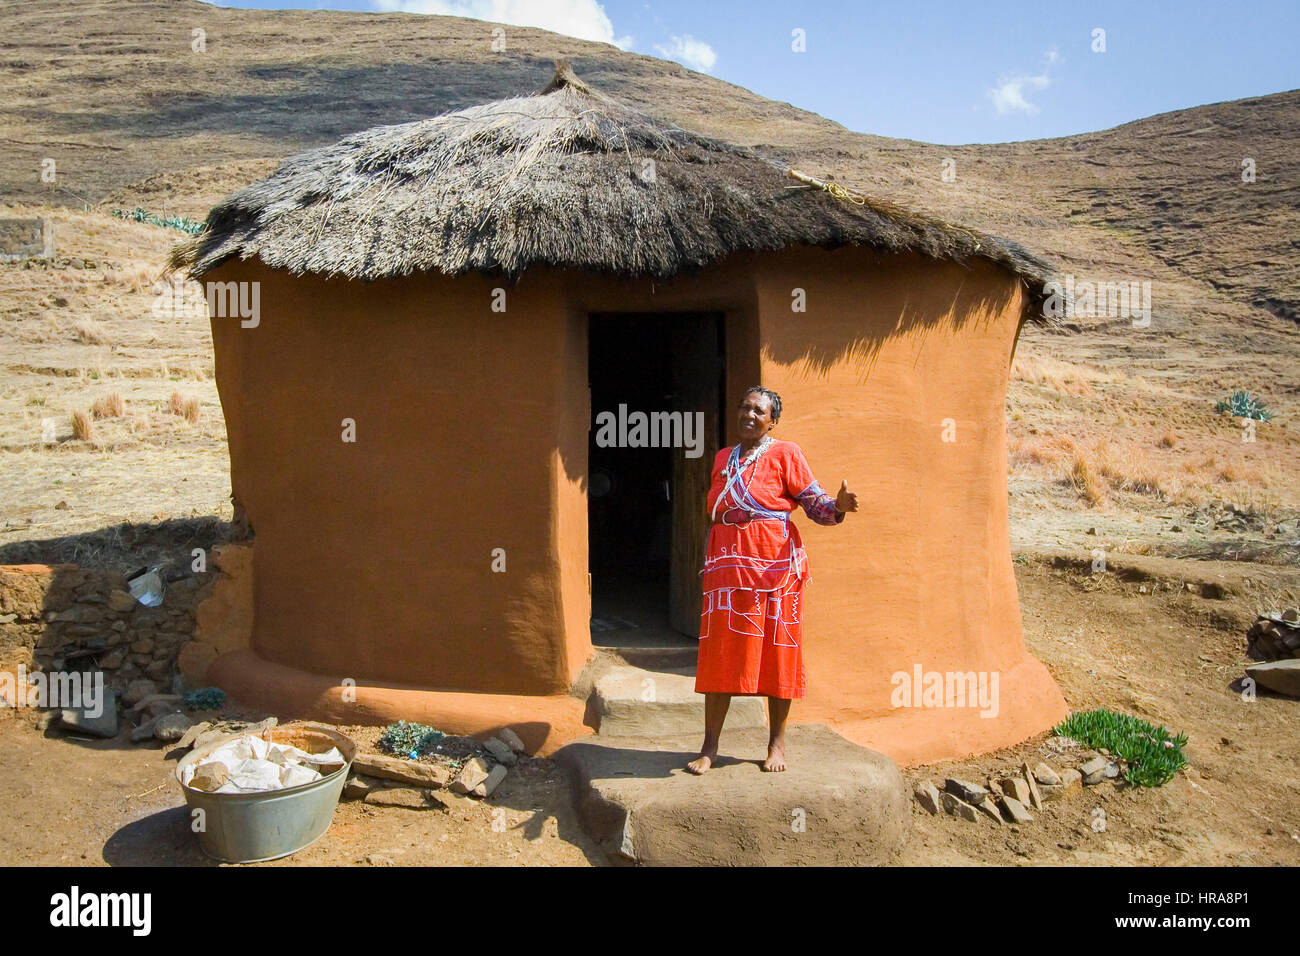 A traditional healer, called a sangoma, stands outside her modest thatch roofed hut in rural Lesotho in a remote village of Butha-Buthe district. Stock Photo